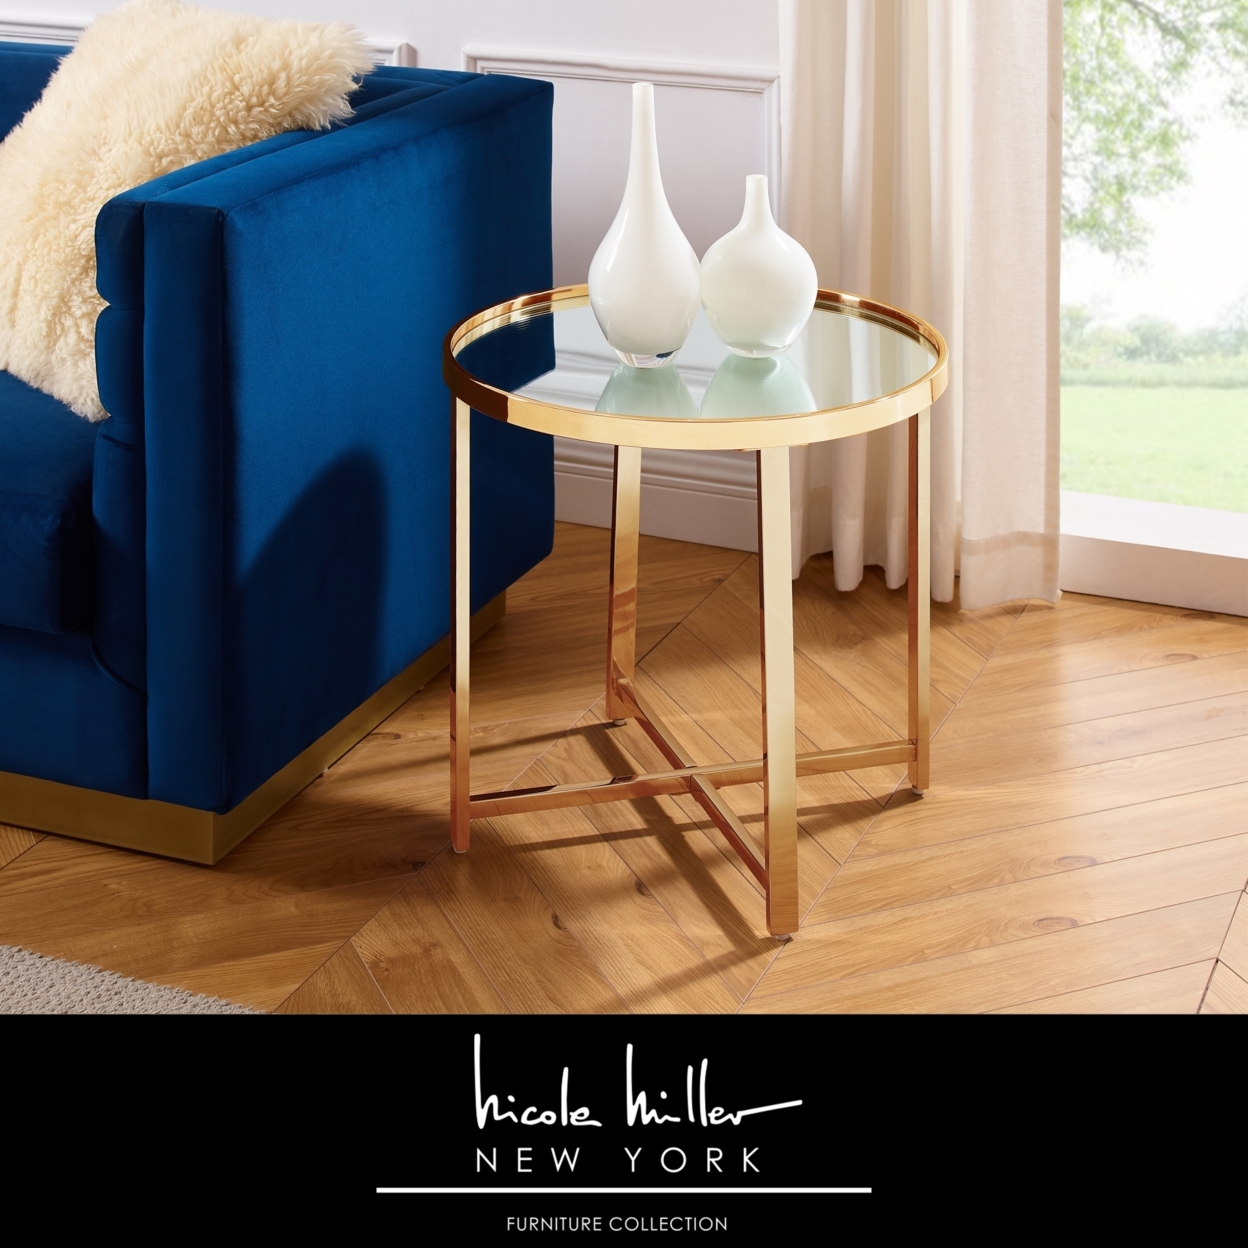 Clarity Table - Mirrored Top, Cross Legs Design, Open Geometric Base - End Table, Gold